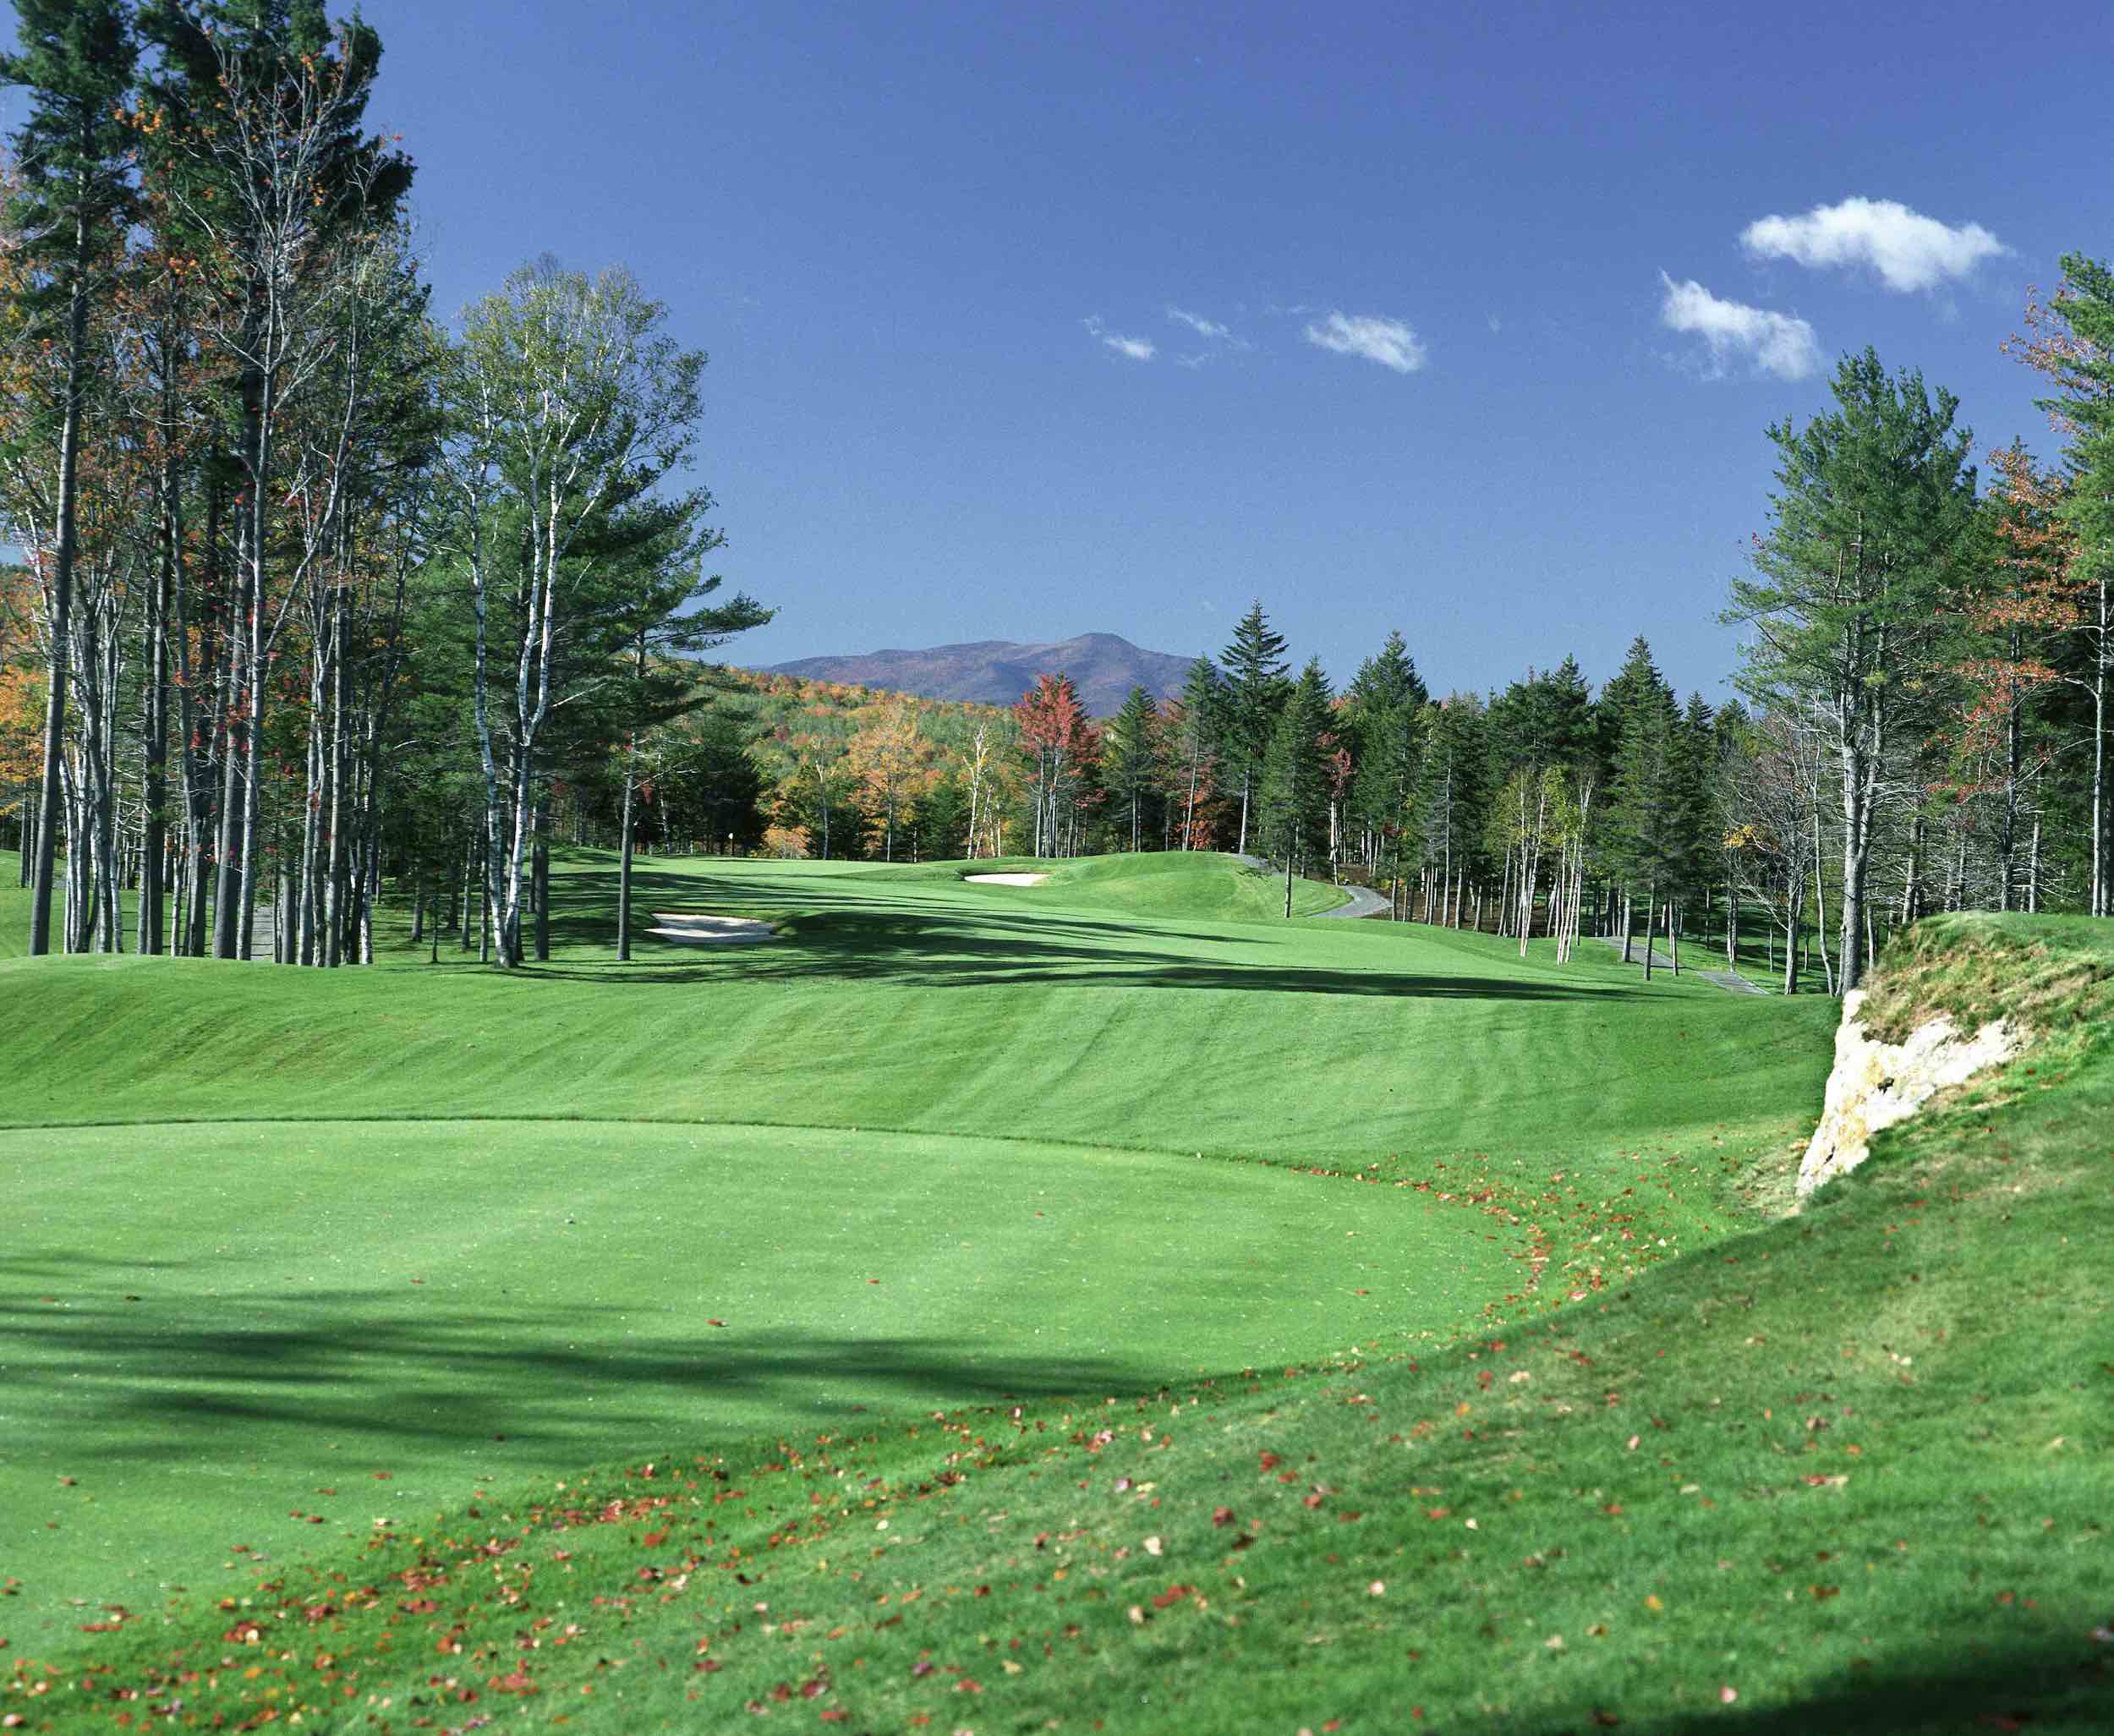 MONTCALM GOLF CLUB’S SOLAR WEATHER STATION OFFERS REAL-TIME DATA, SAFETY AND RELIABLE FORECASTS